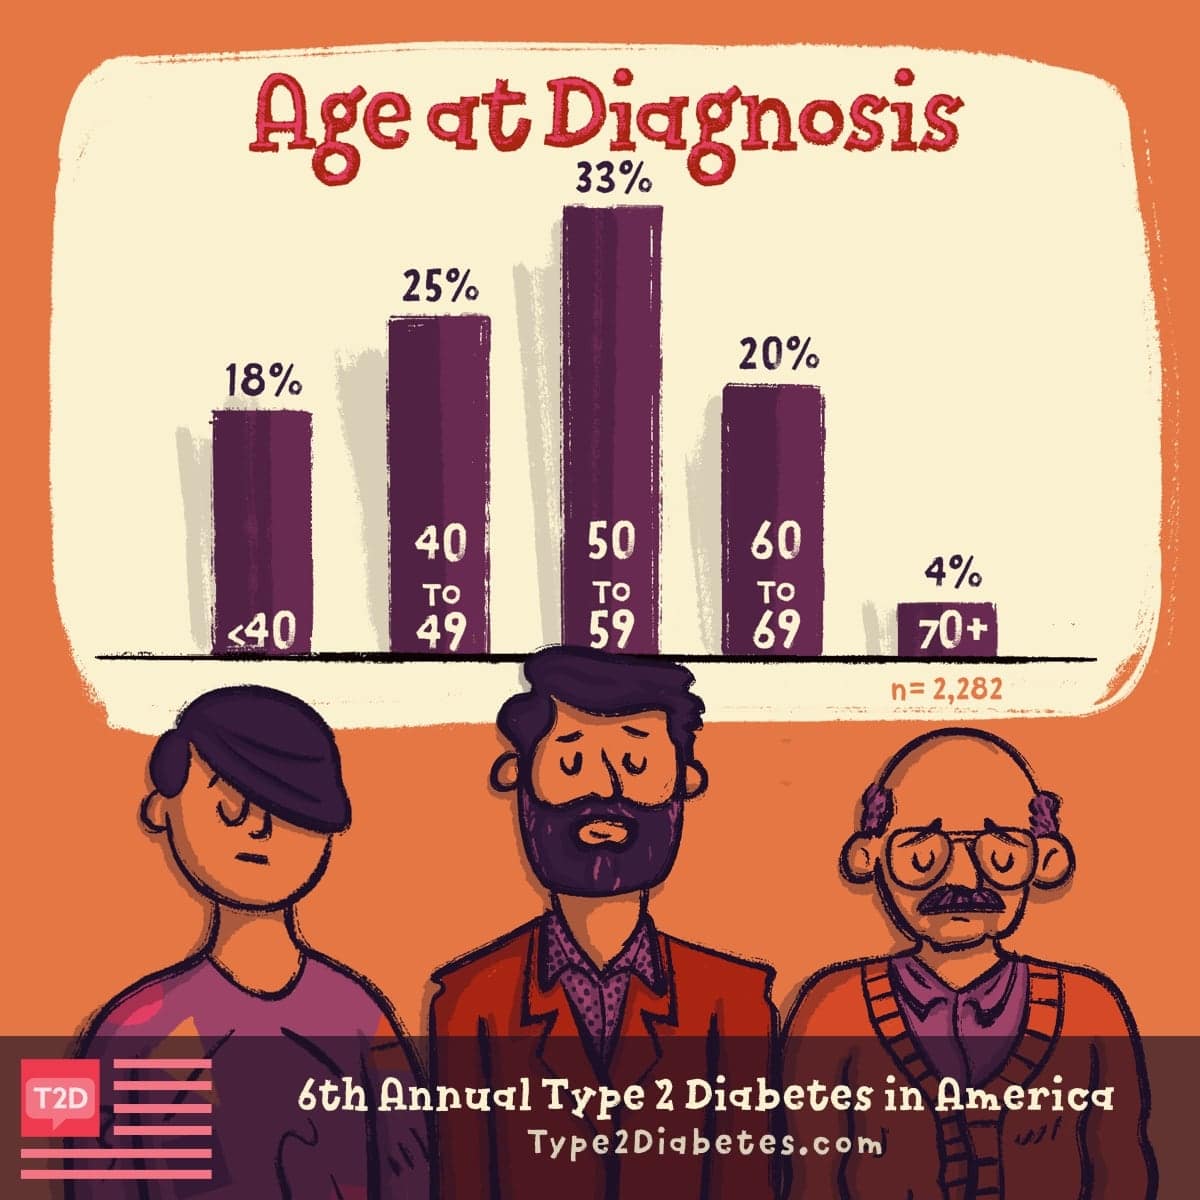 The majority of survey respondents (33%) were diagnosed between age 50 to 59.